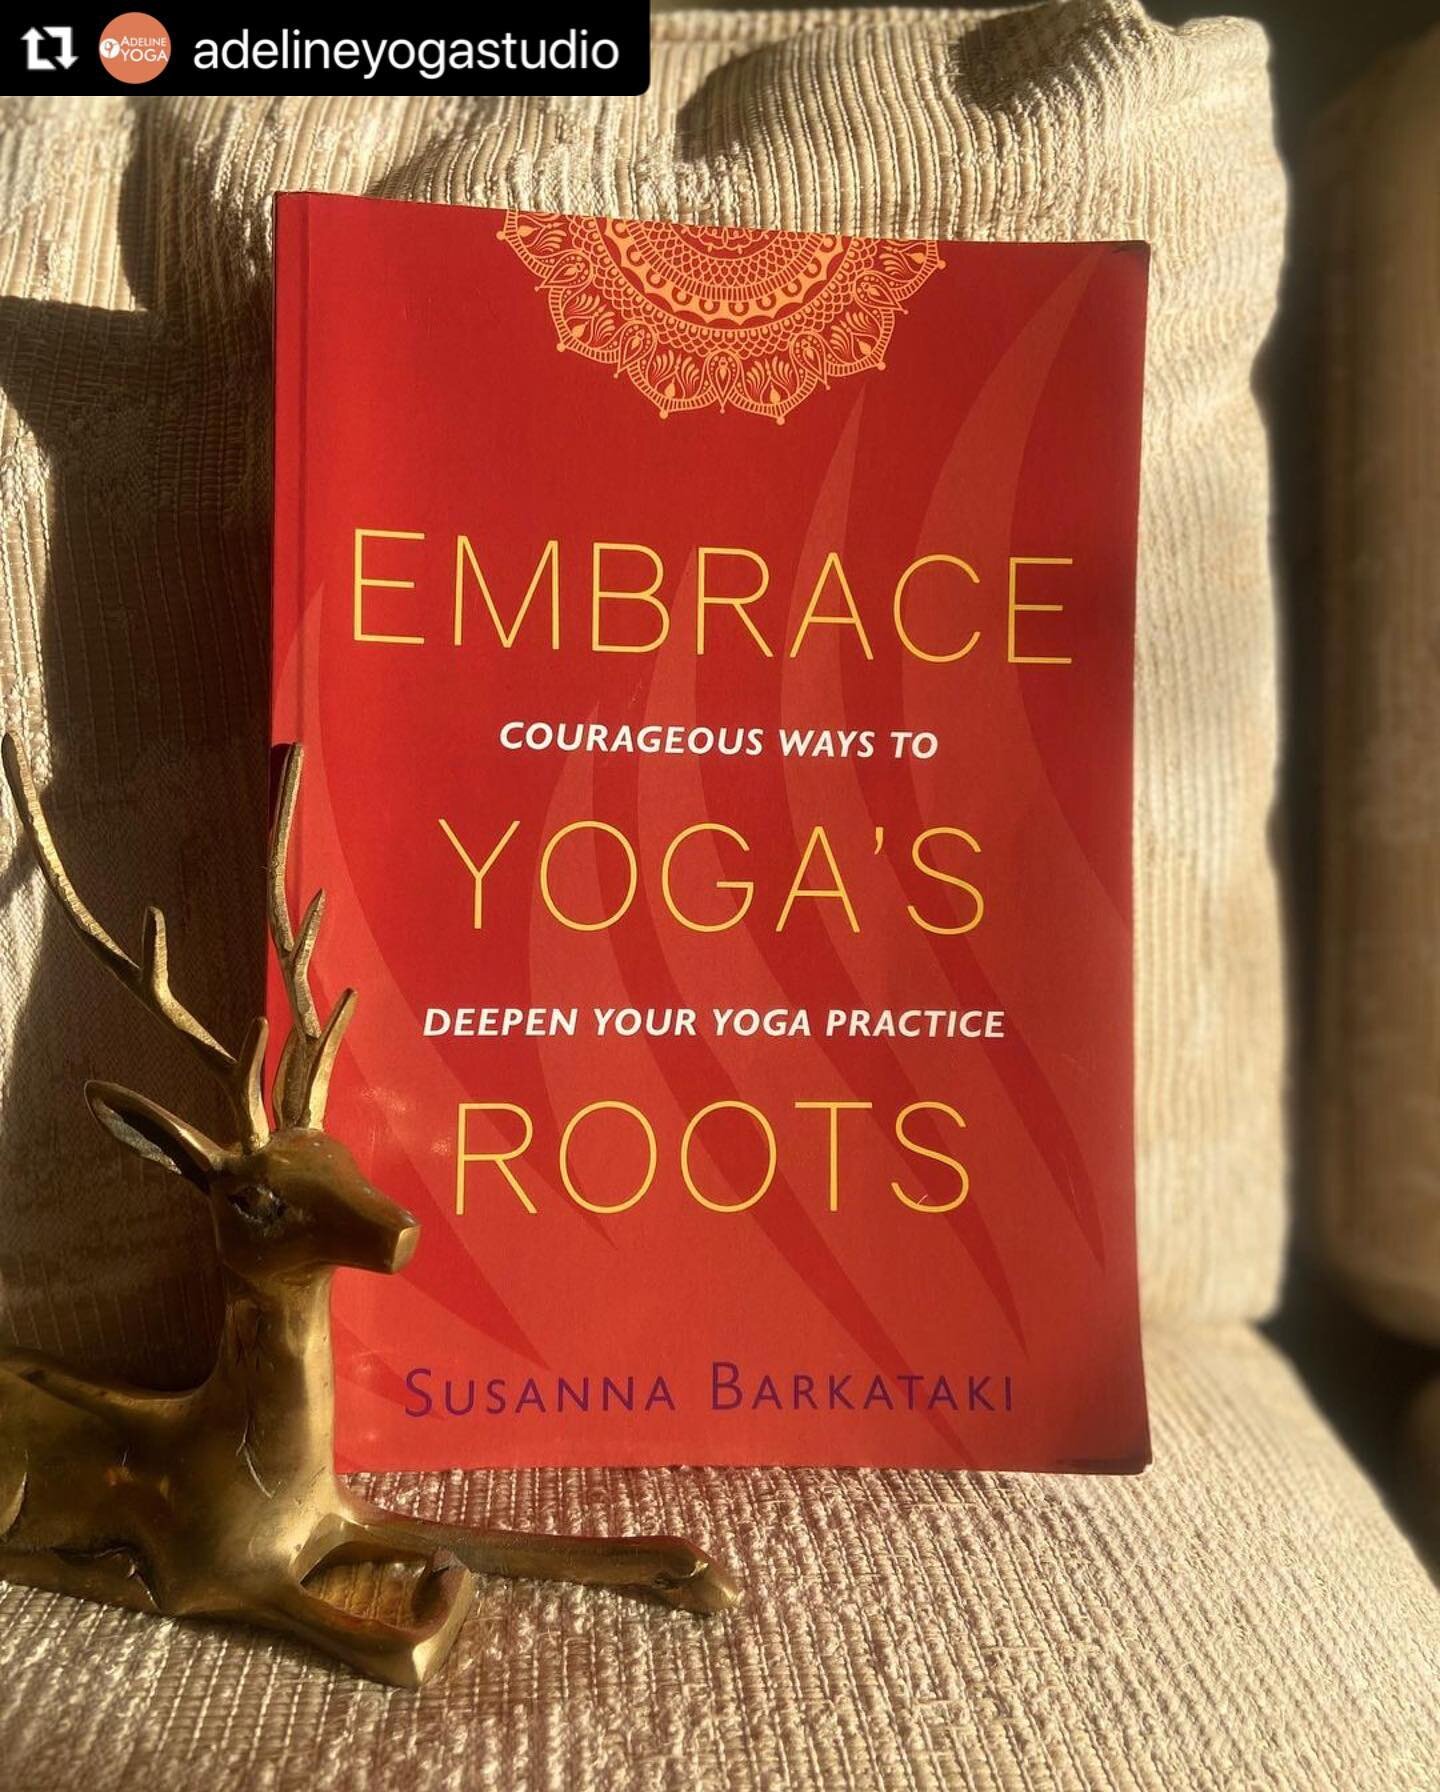 Will you join us? 

#Repost @adelineyogastudio with @make_repost
・・・
Join us for the upcoming:  Racism &amp; Yoga Study Group. This session we'll be reading Embrace Yoga's Roots by @susannabarkataki 💜

📚Have you read Embrace Yoga's Roots yet? What 